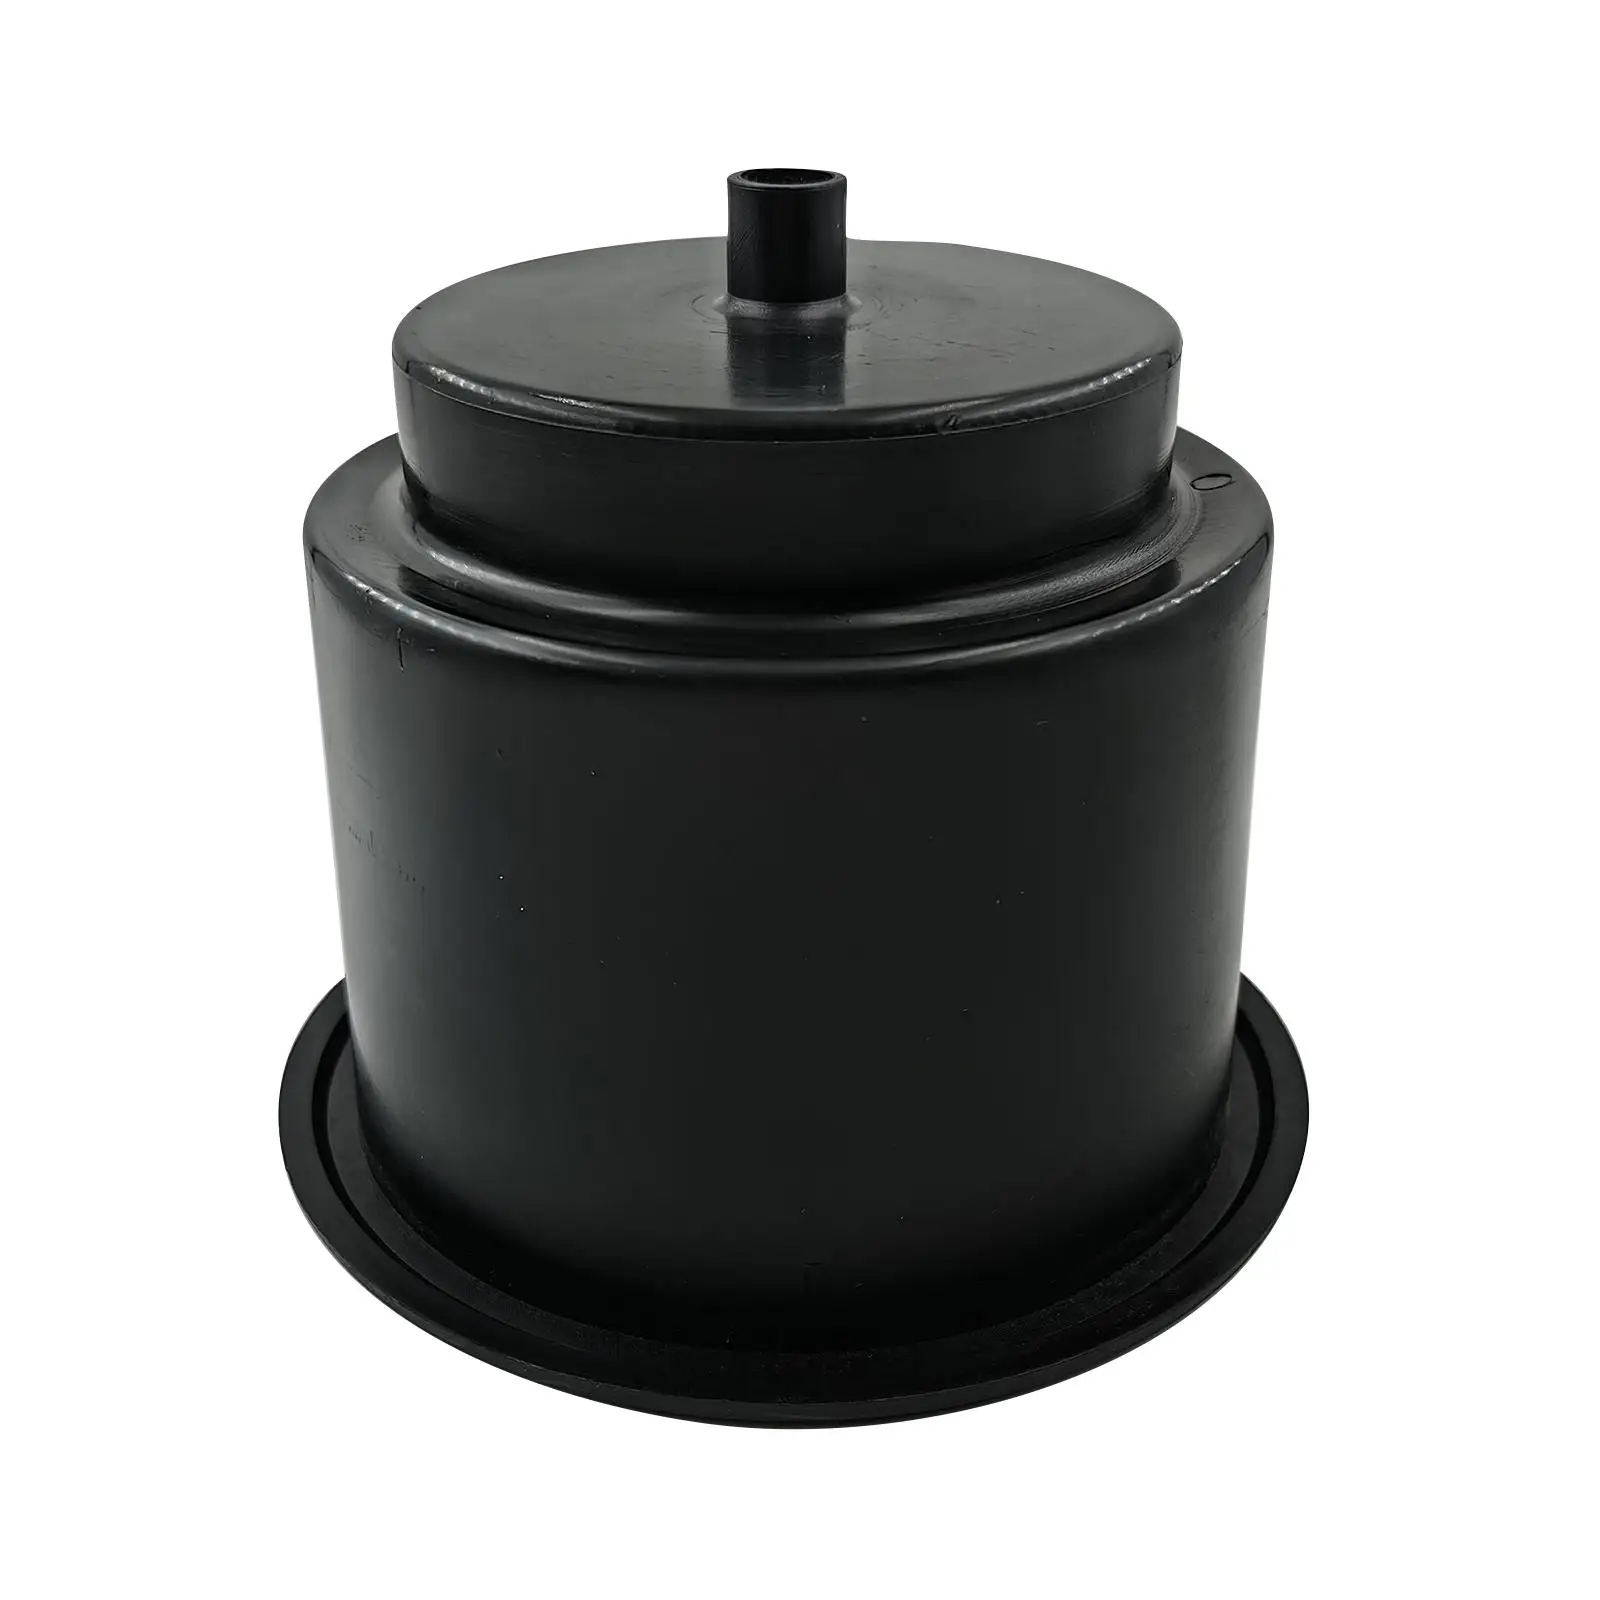 

Recessed Cup Drink Holder Universal with Drain Hole Black for Caravans Yachts Marine Durable Accessory